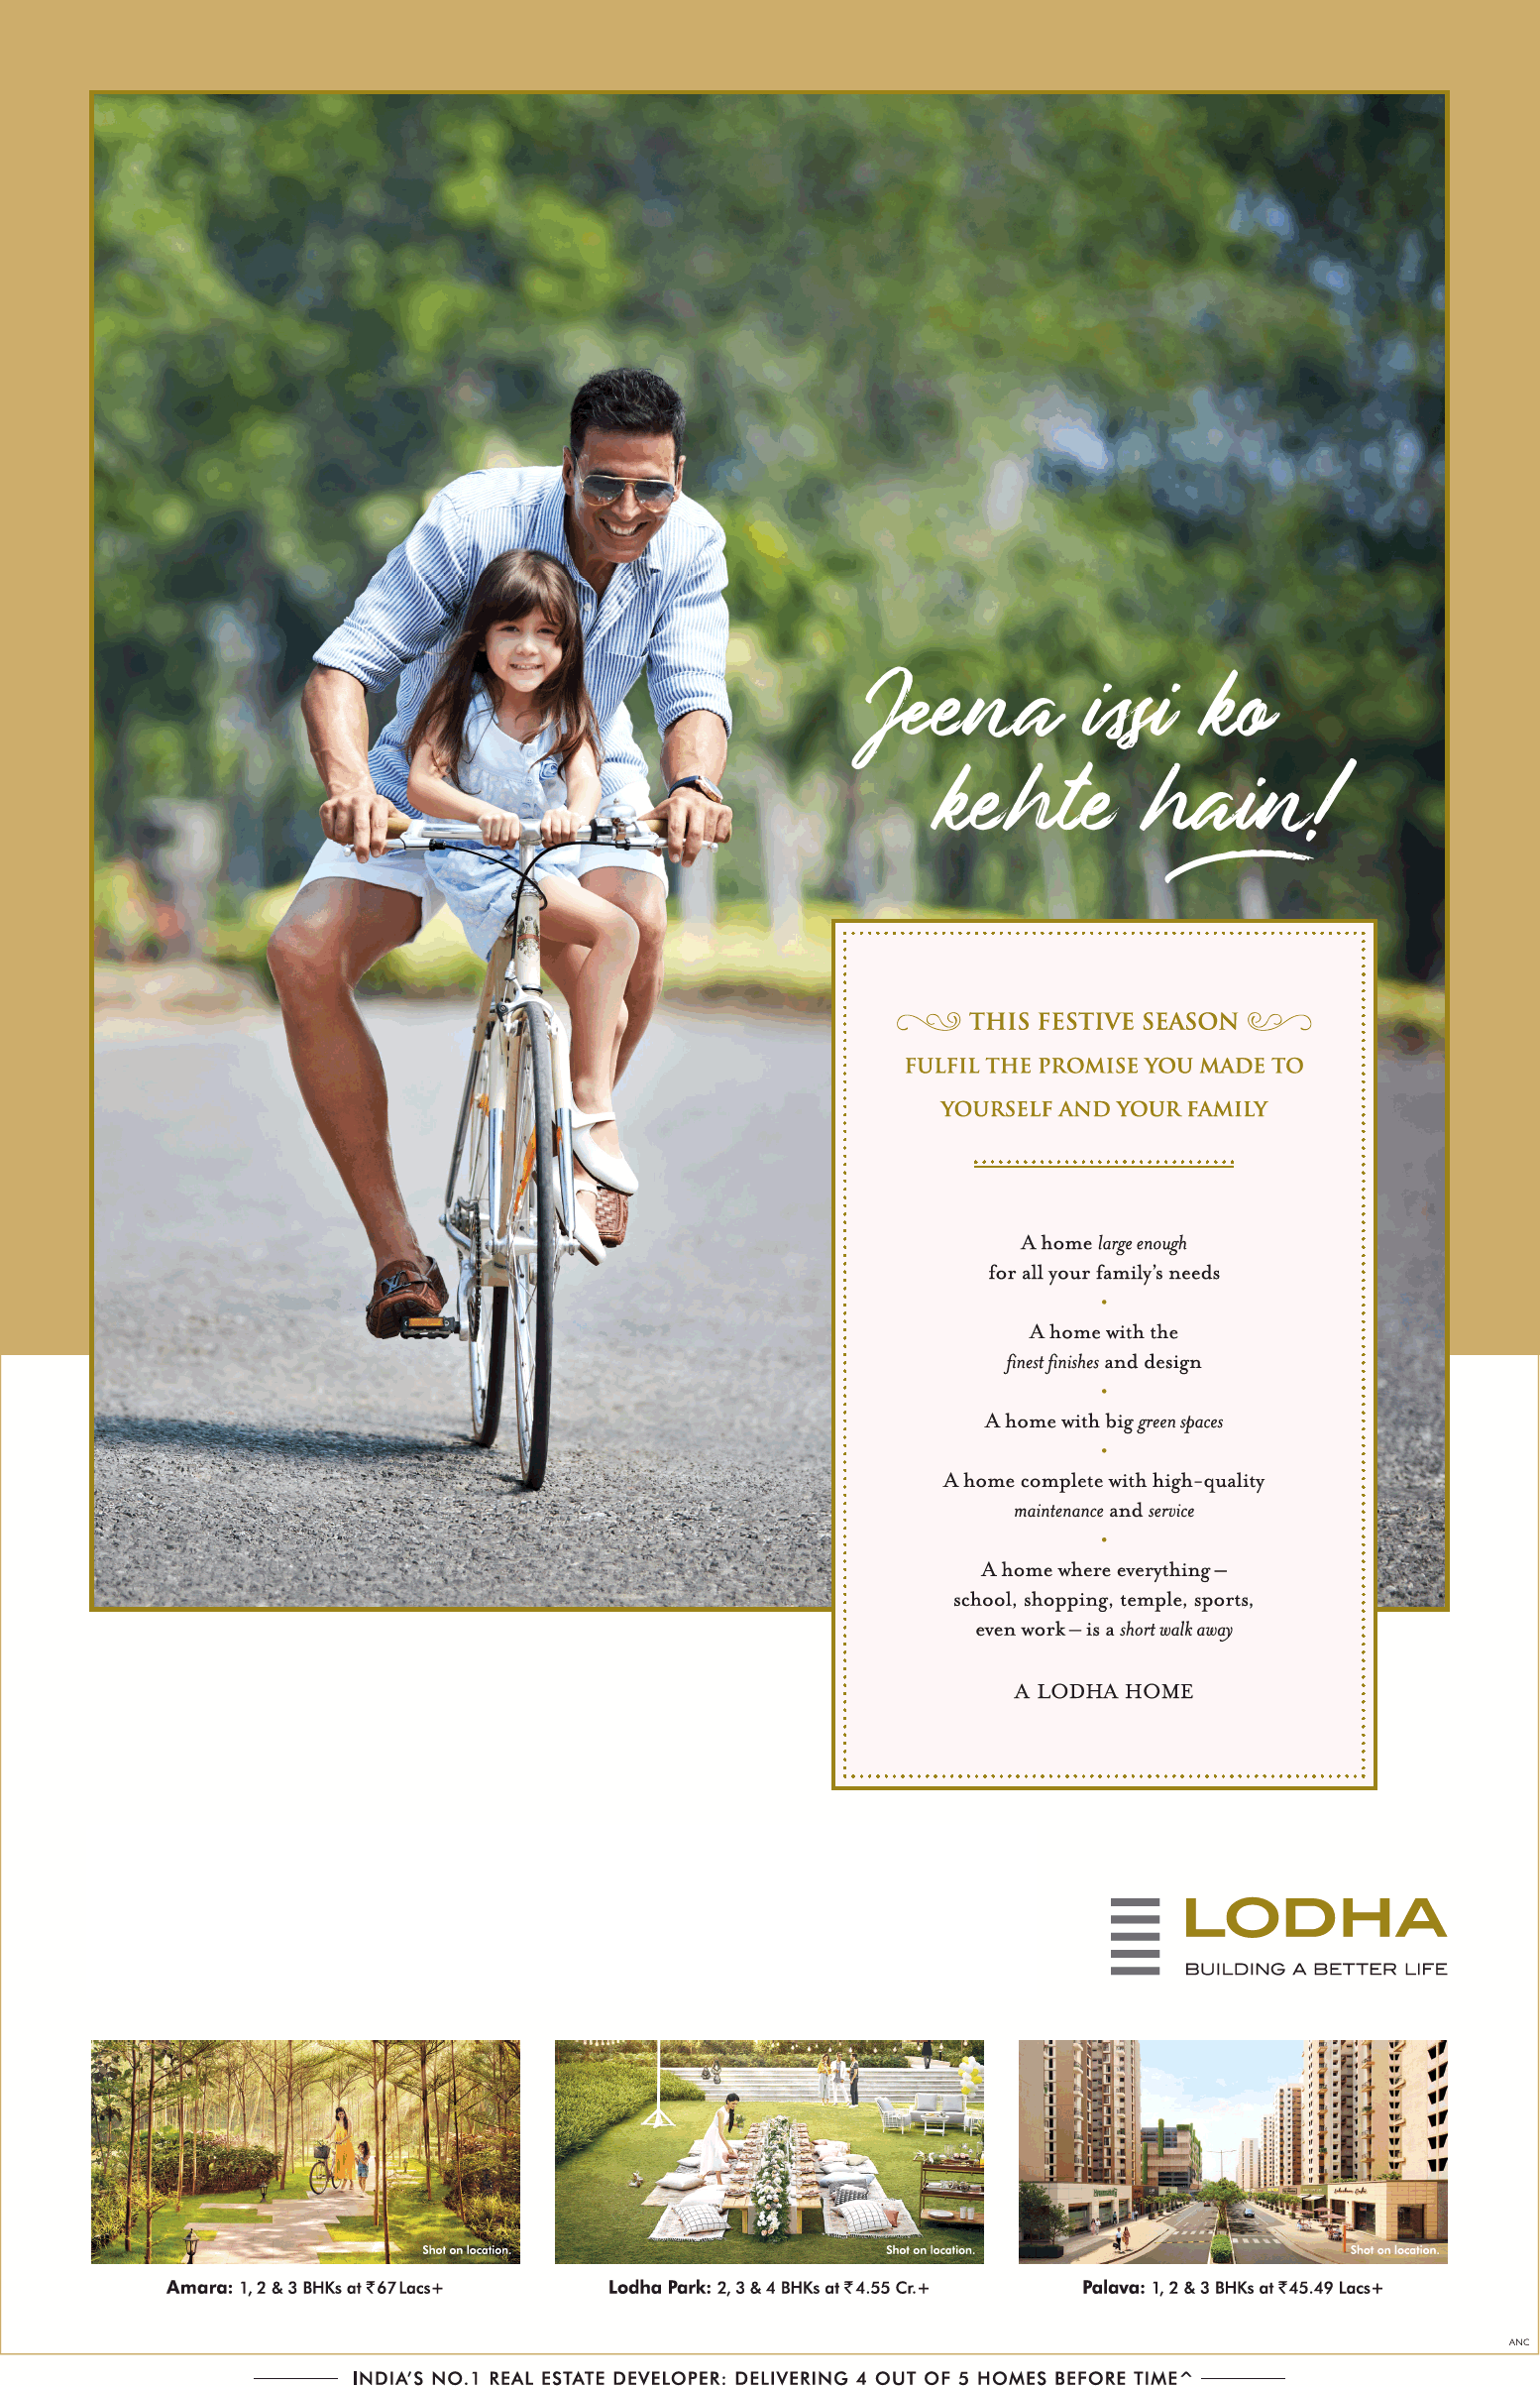 This festive season fulfill the promise you made to yourself and your family at Lodha Projects in Mumbai Update